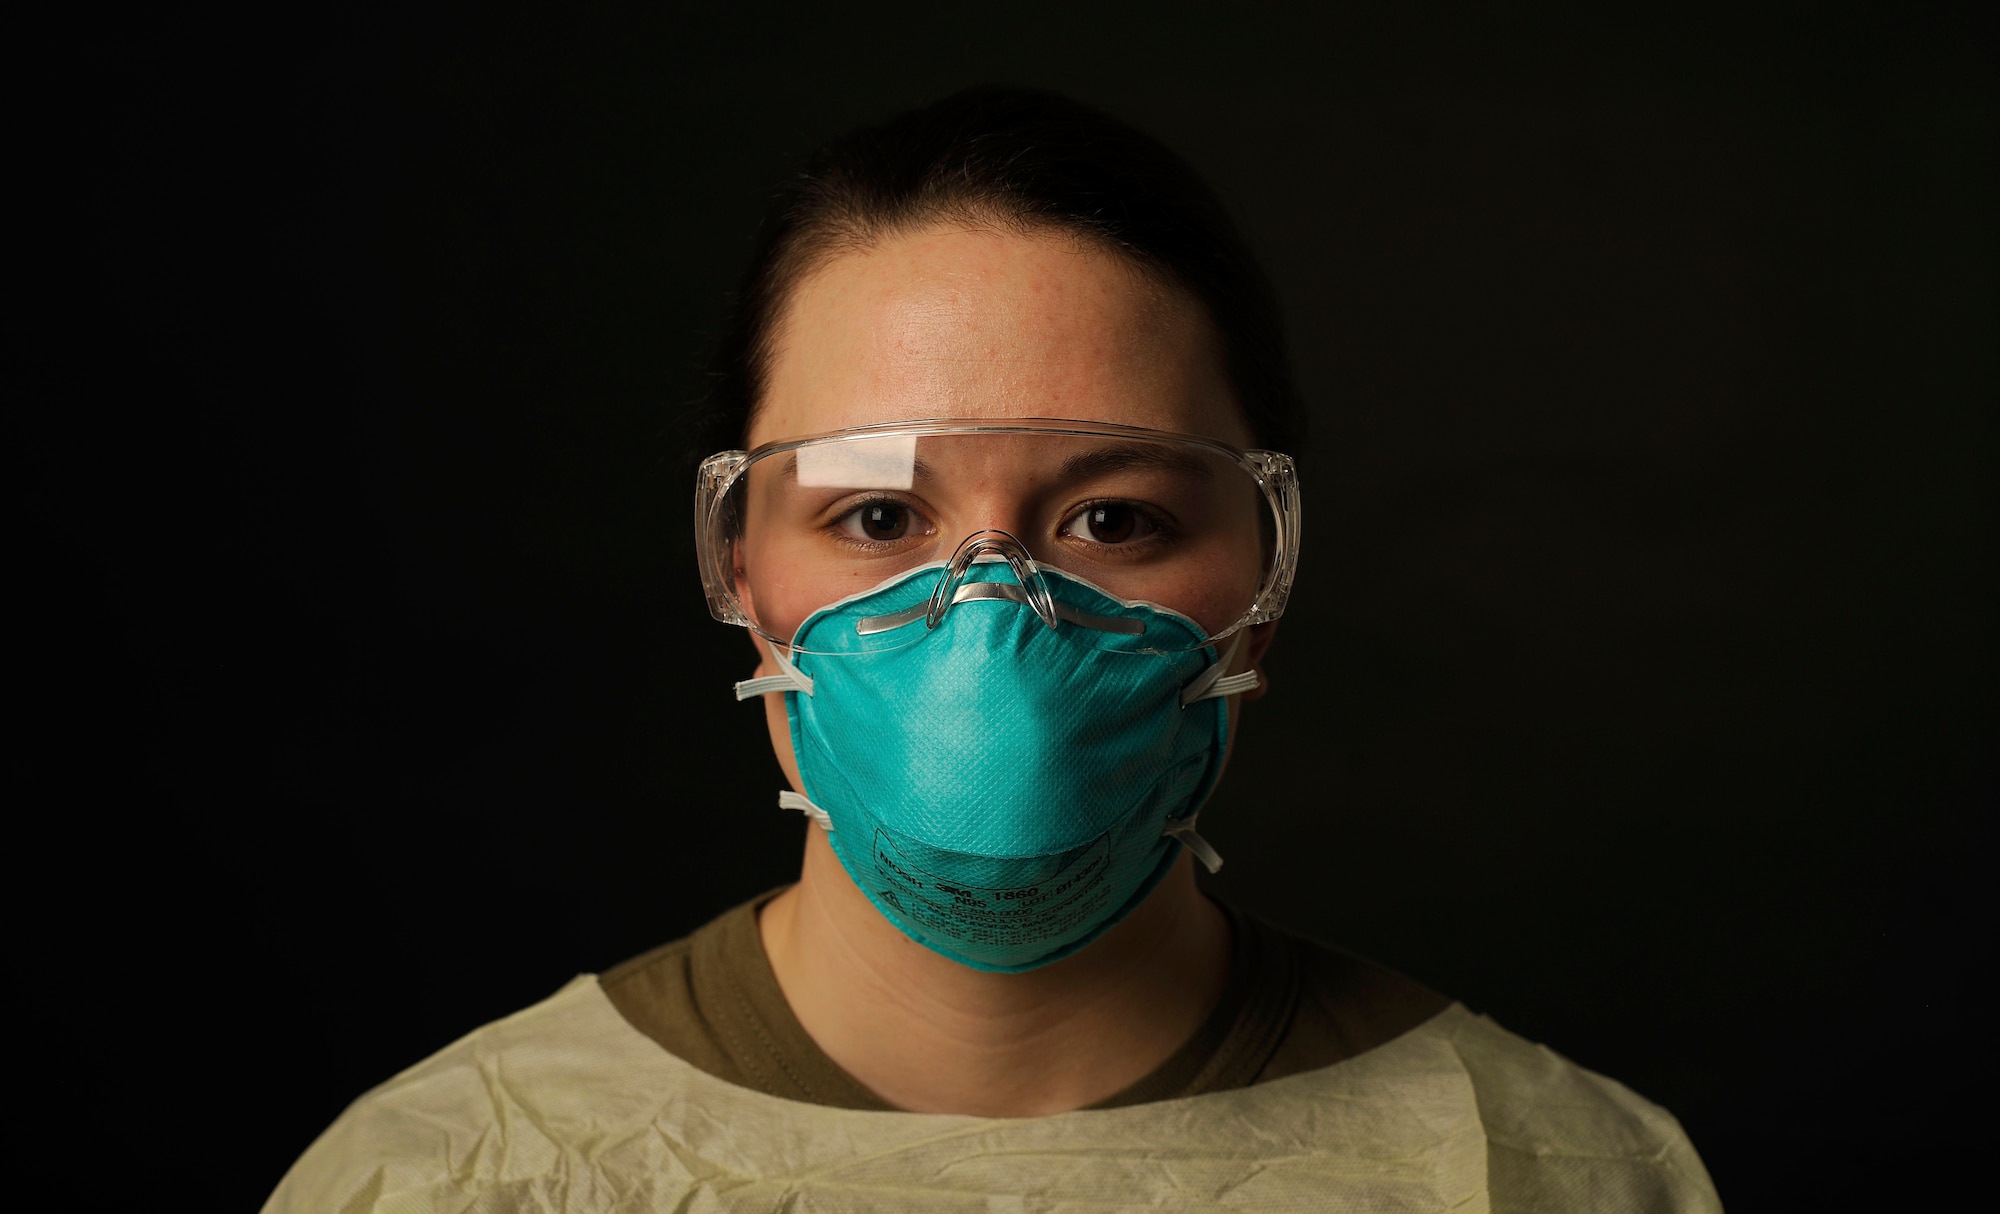 U.S. Air Force Senior Airman Toula Farnsworth, a 354th Operational Medical Readiness Squadron medical technician, poses for a photo in COVID-19 proper protective equipment on Eielson Air Force Base, Alaska, Jan. 19, 2021. Farnsworth is responsible for administering the COVID-19 test and ensuring the test is accurate by preventing cross-contamination. (U.S. Air Force photo by Senior Airman Beaux Hebert)